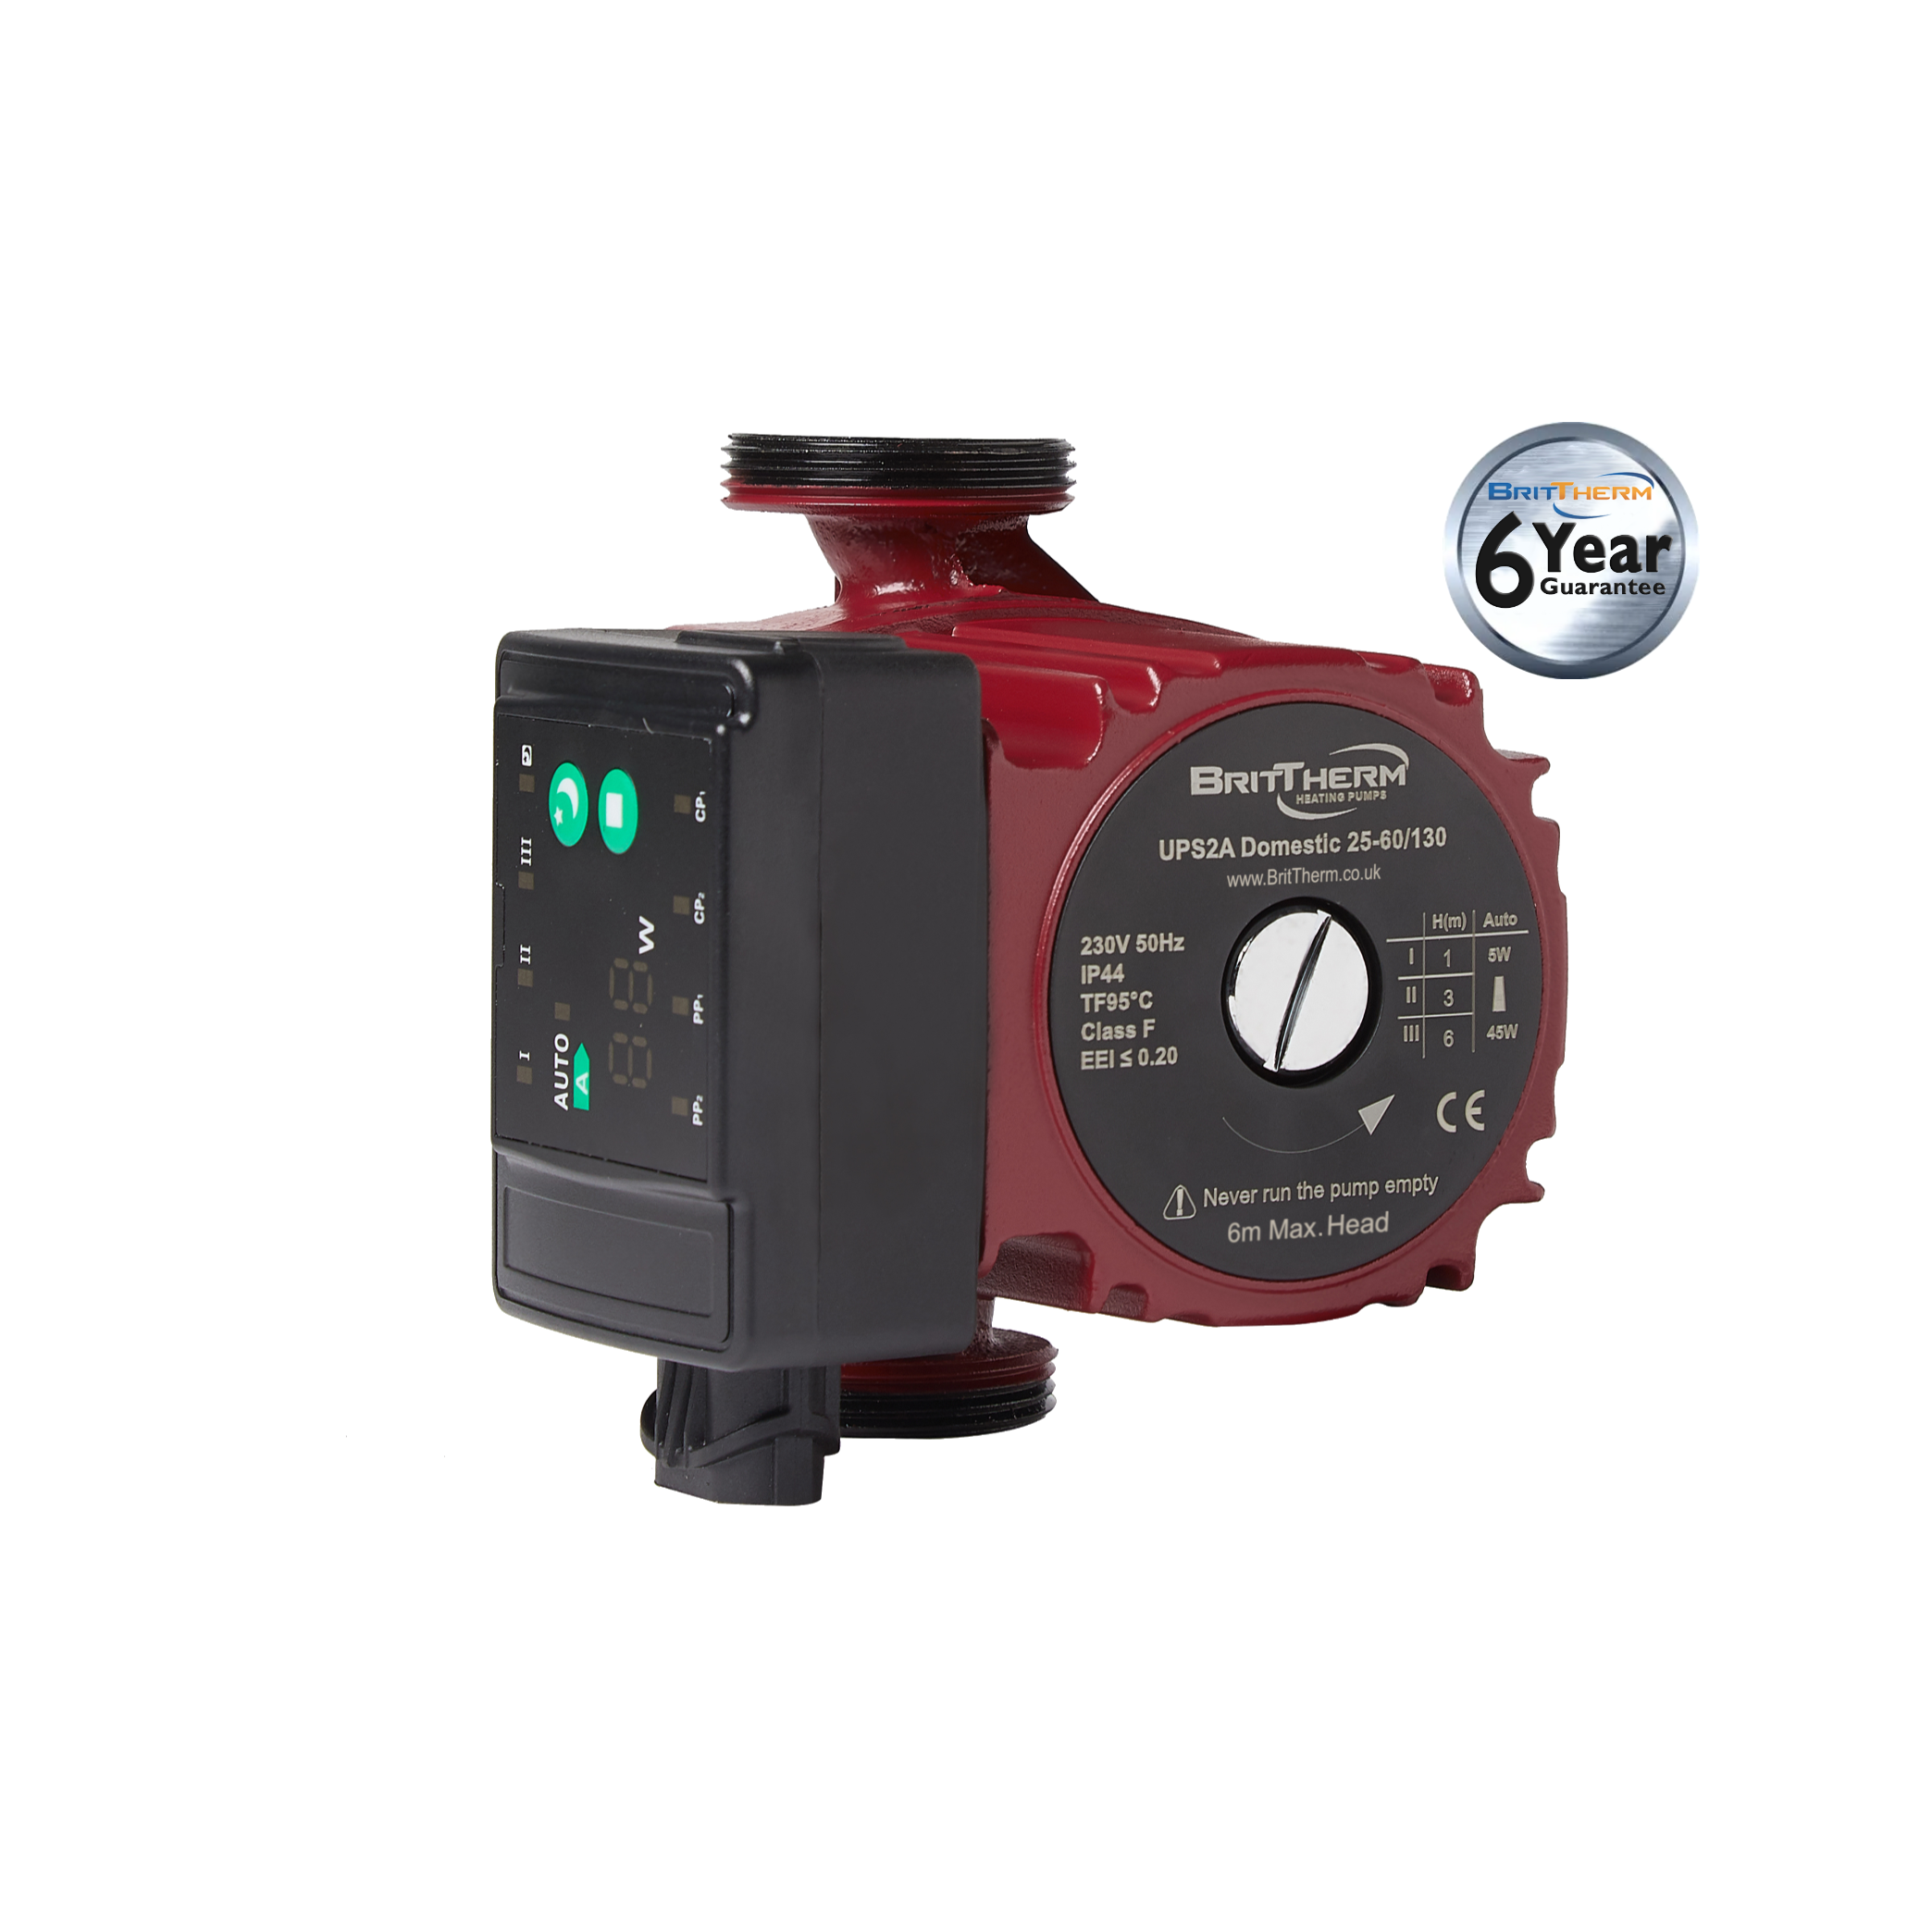 BritTherm MODULATING Central heating pump UPS2A Domestic Pro Heating Pump 15-60/130 3 speed 6 meter head (6 YEARS)